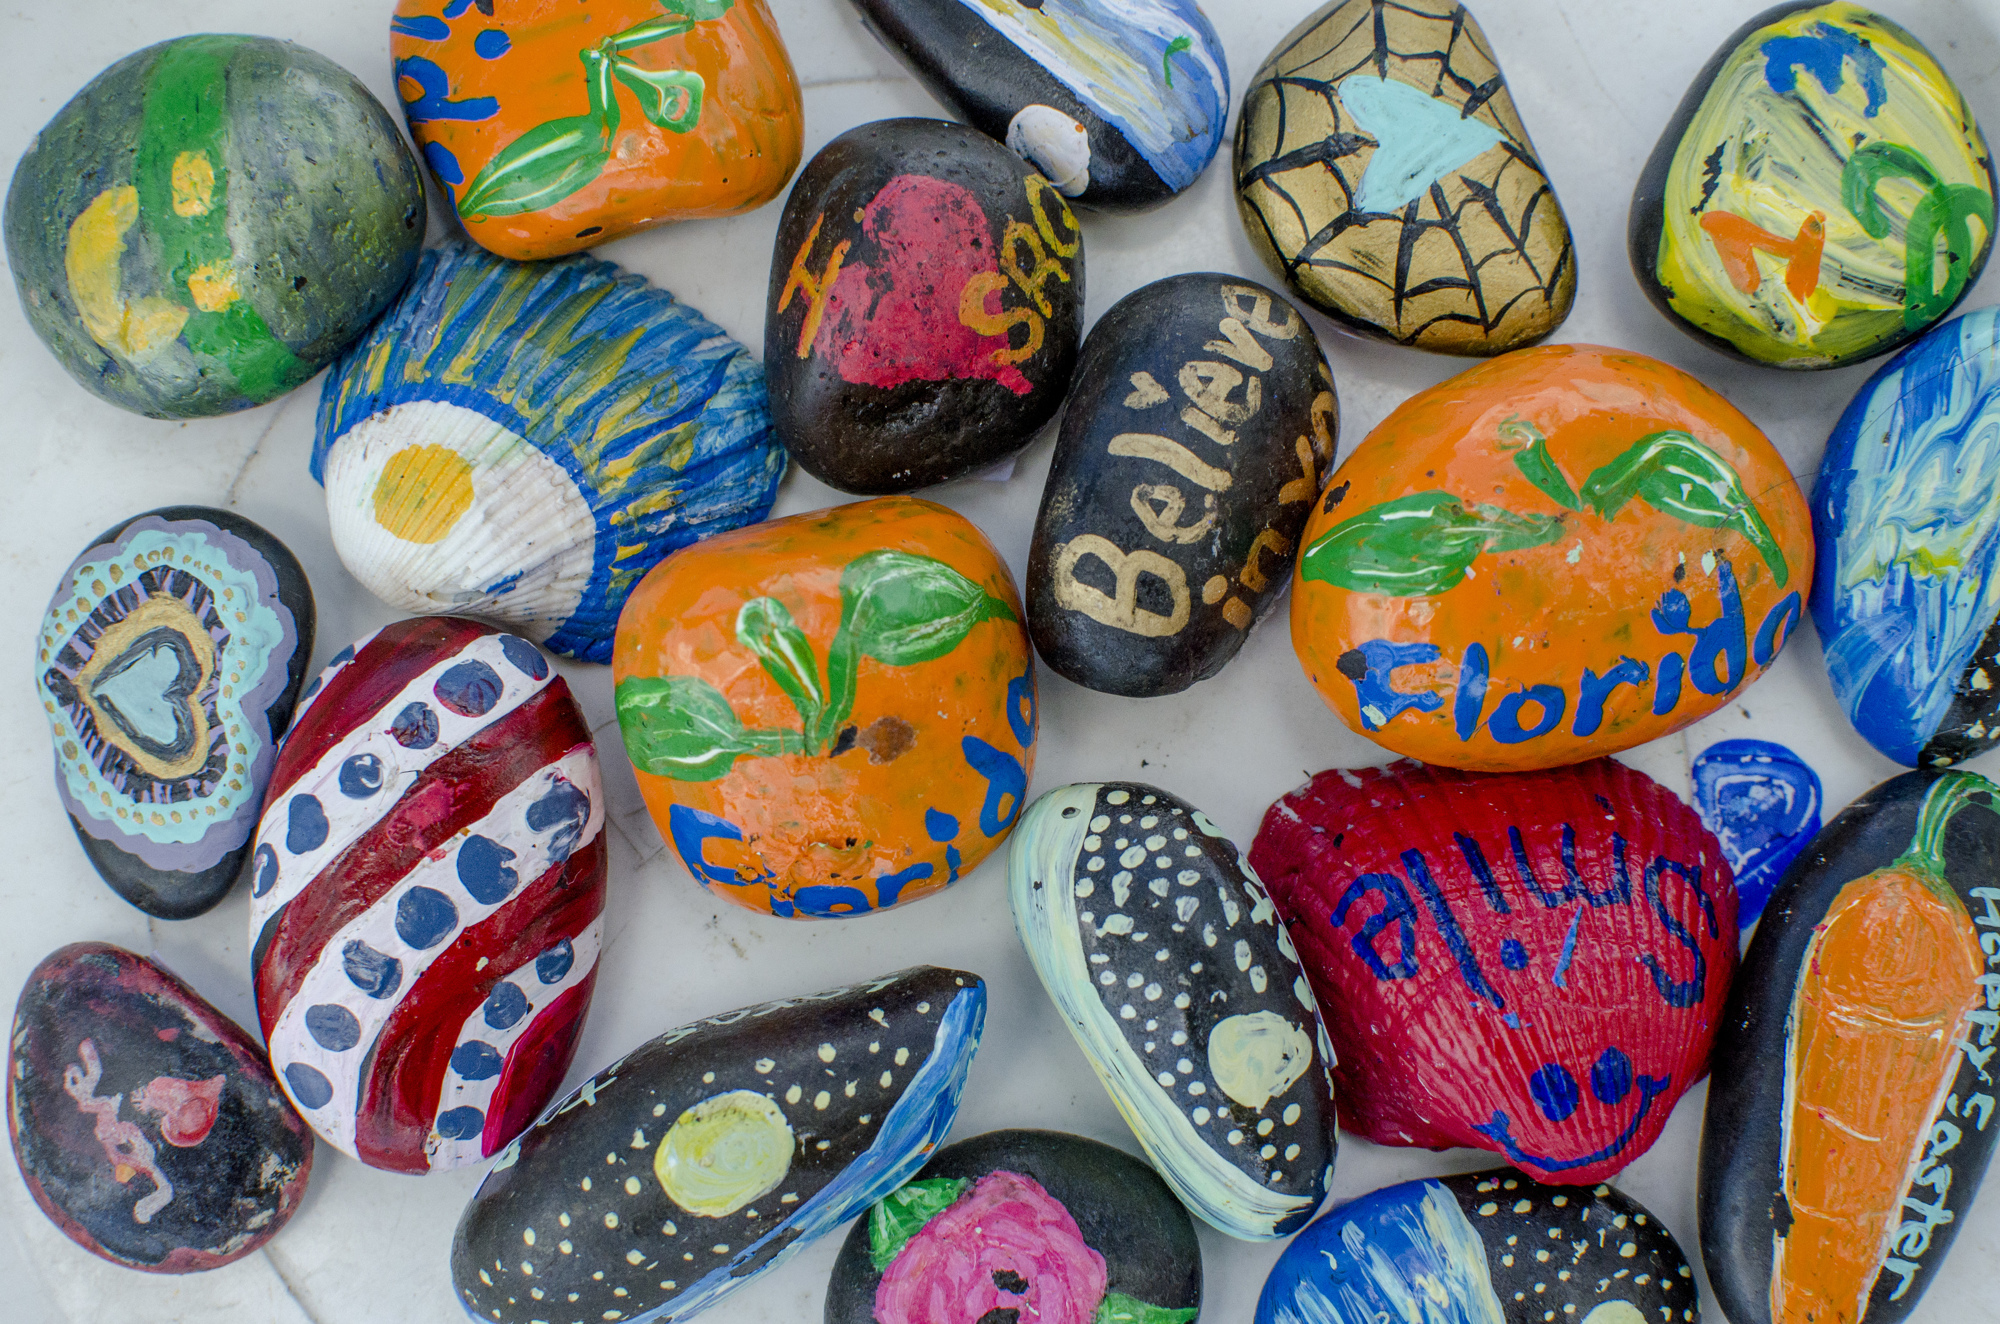  More than 400 members, paint and hide rocks throughout the Sarasota area and beyond.